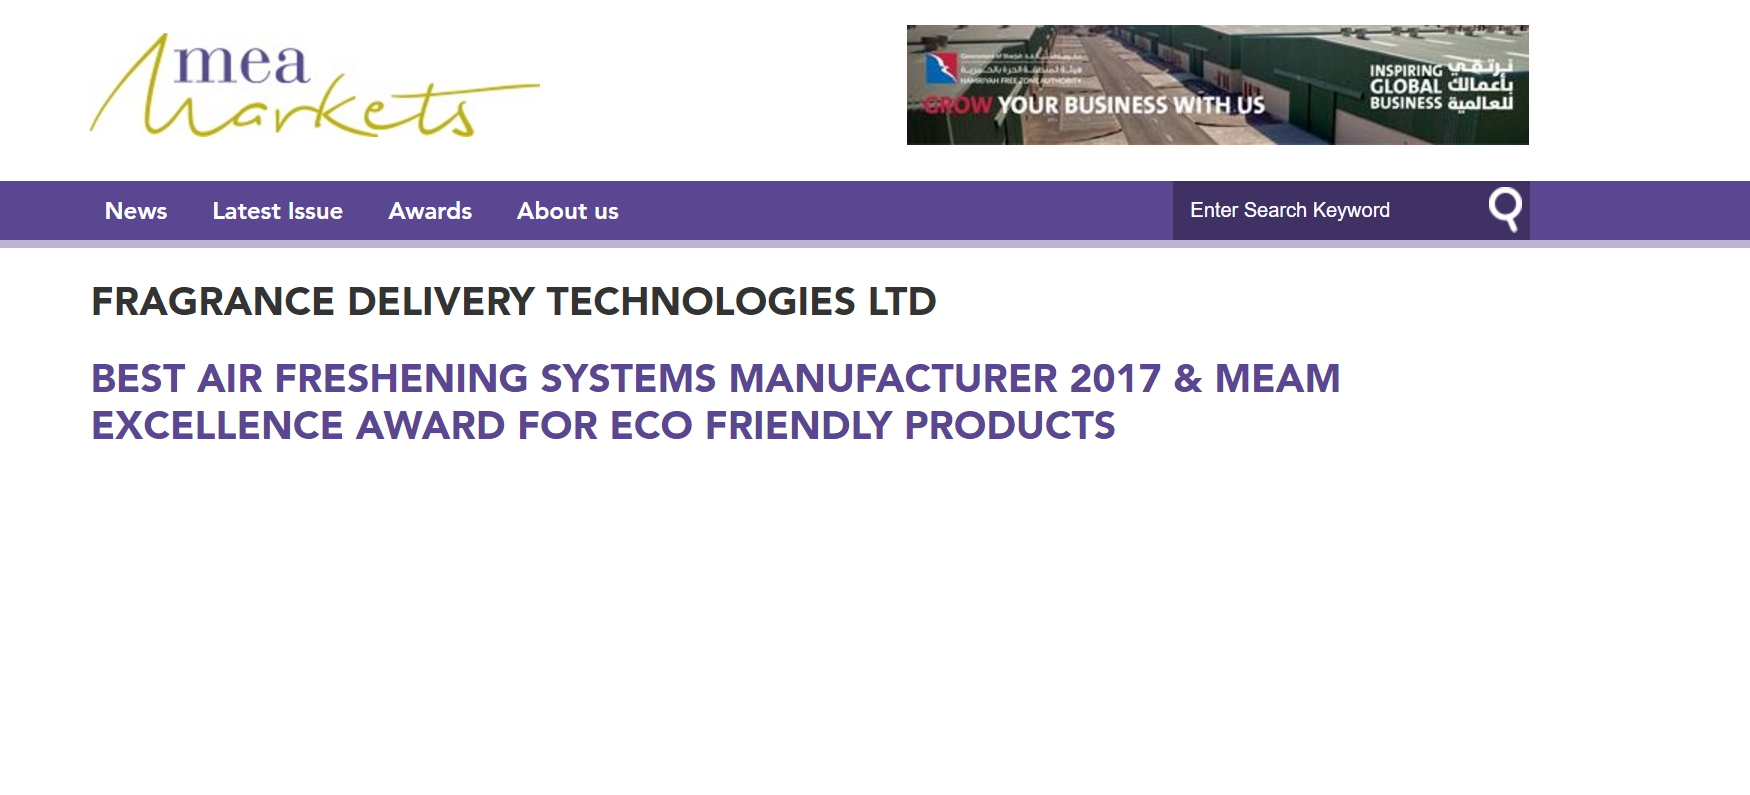 FRAGRANCE DELIVERY TECHNOLOGIES LTD BEST AIR FRESHENING SYSTEMS MANUFACTURER 2017 & MEAM EXCELLENCE AWARD FOR ECO FRIENDLY PRODUCTS